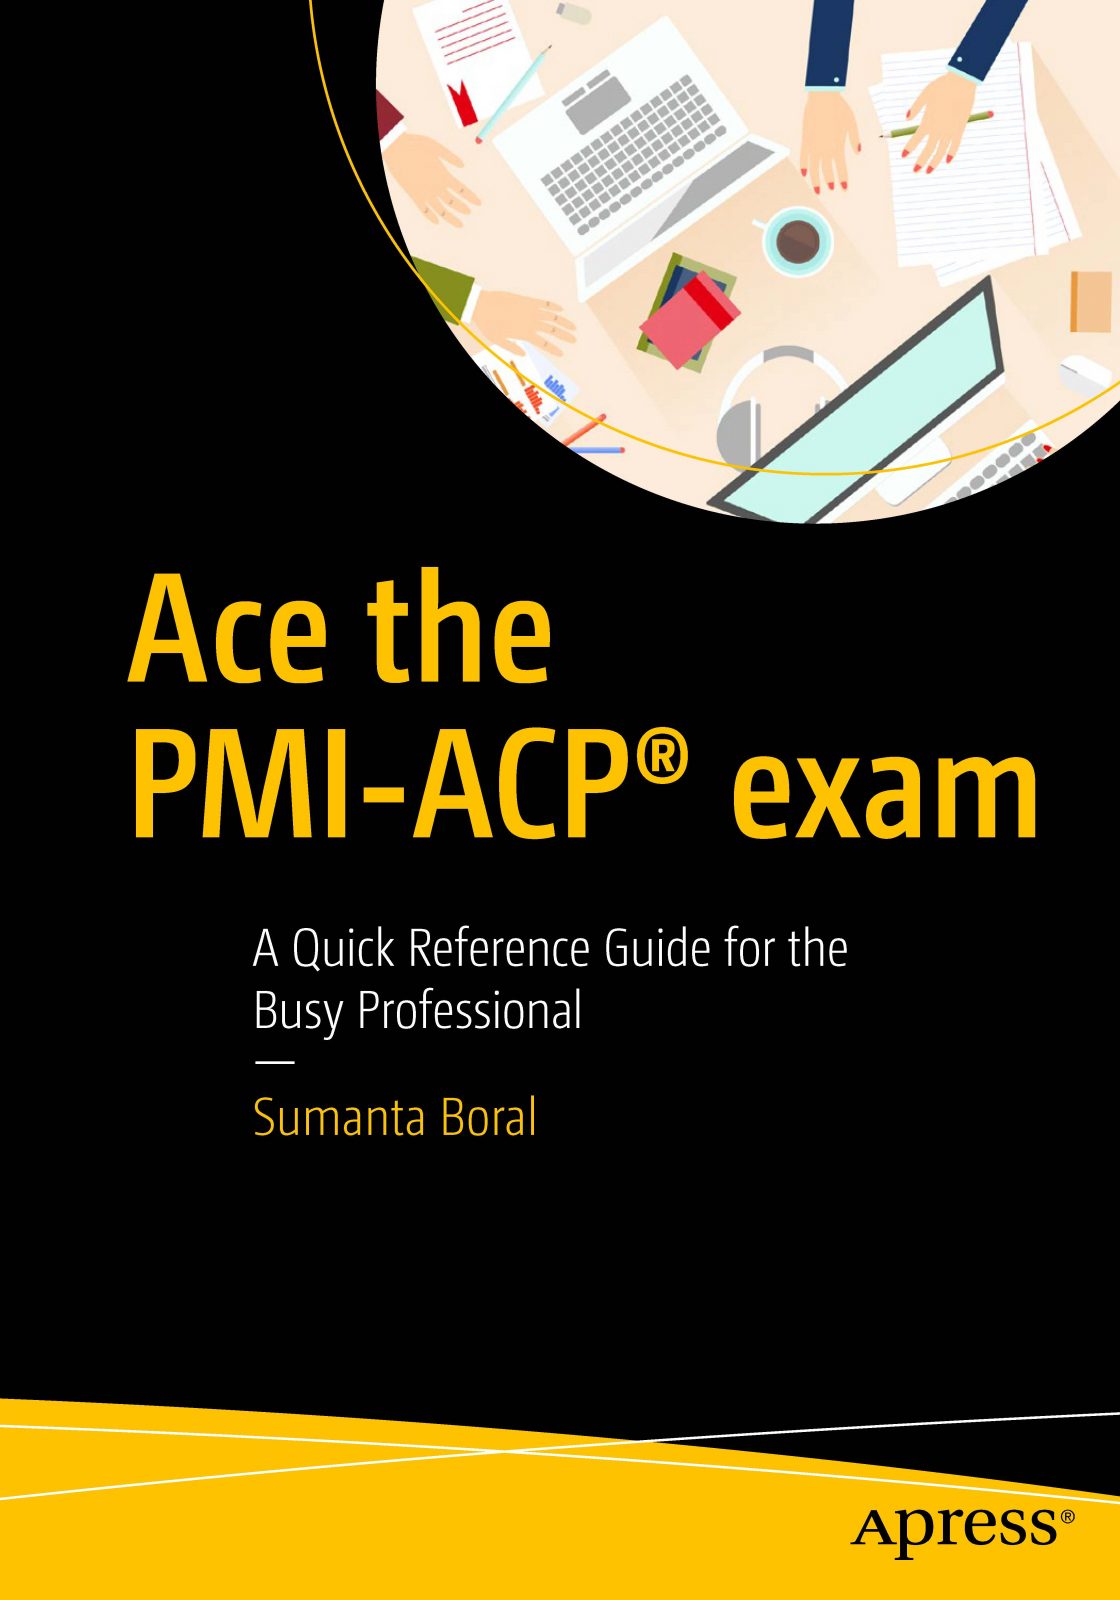 Ace the PMI-ACP exam Study pack: Compact PDF Version- PDF Download